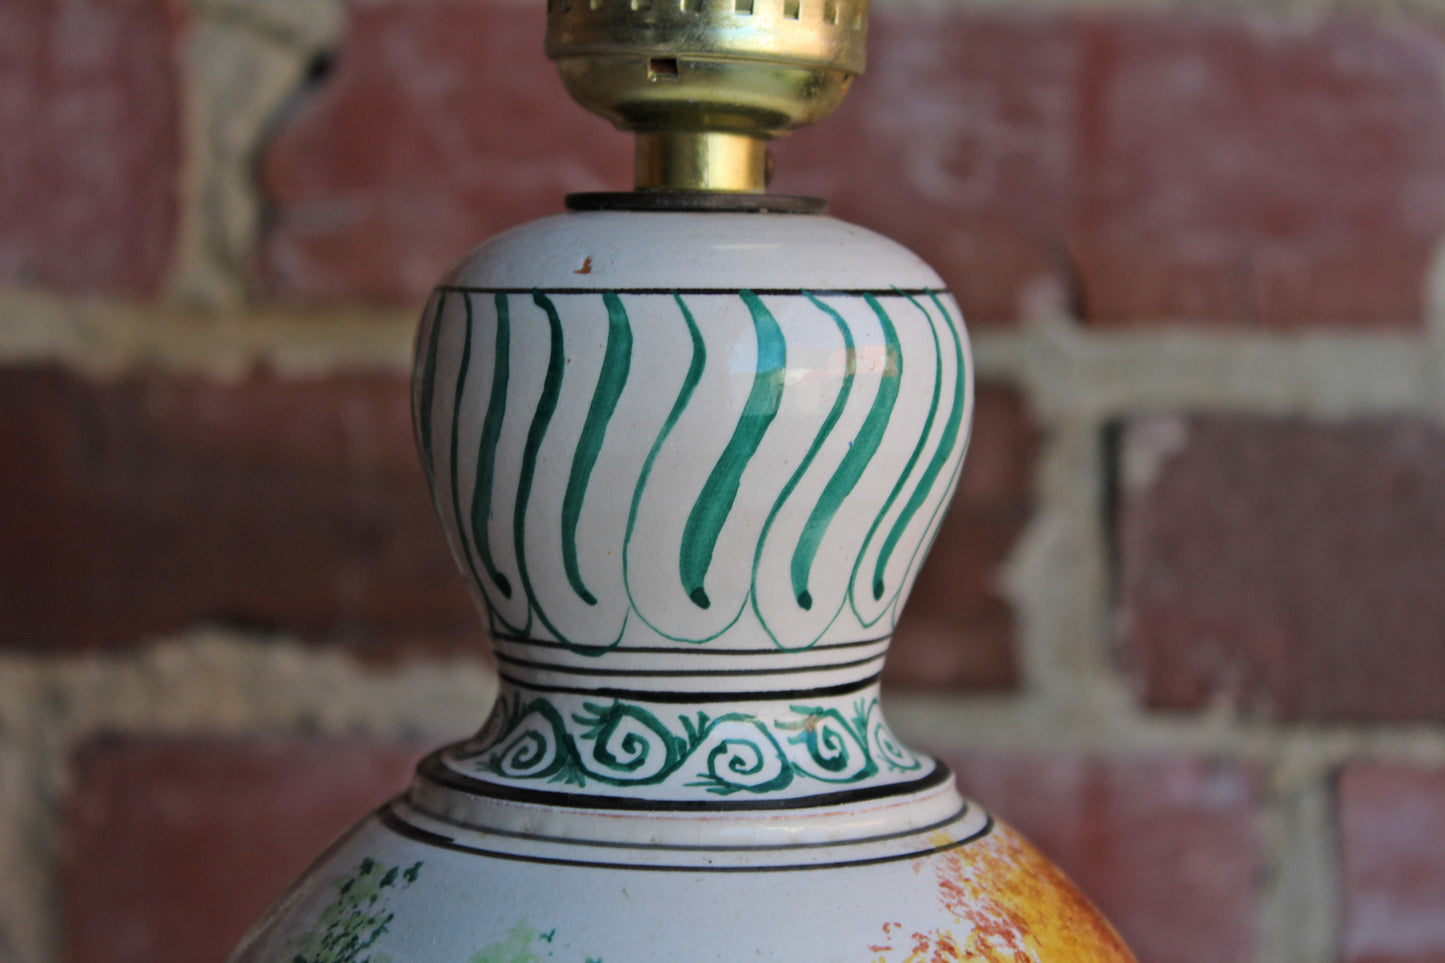 Lapithos Cyprus Hand Painted Lamp with Country Scene